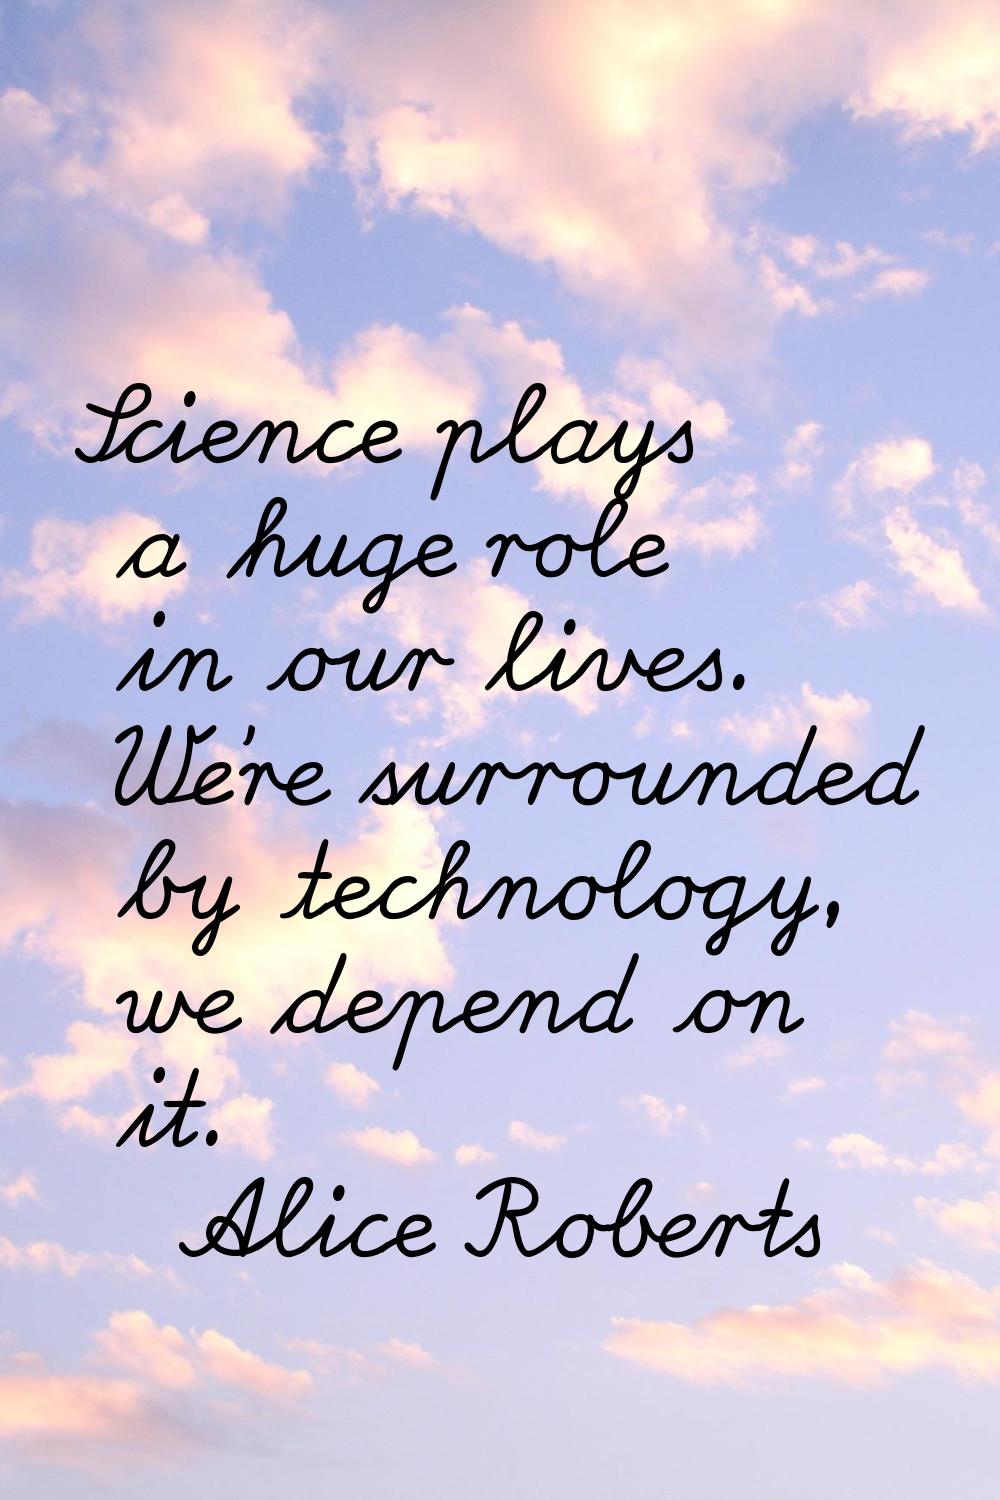 Science plays a huge role in our lives. We're surrounded by technology, we depend on it.